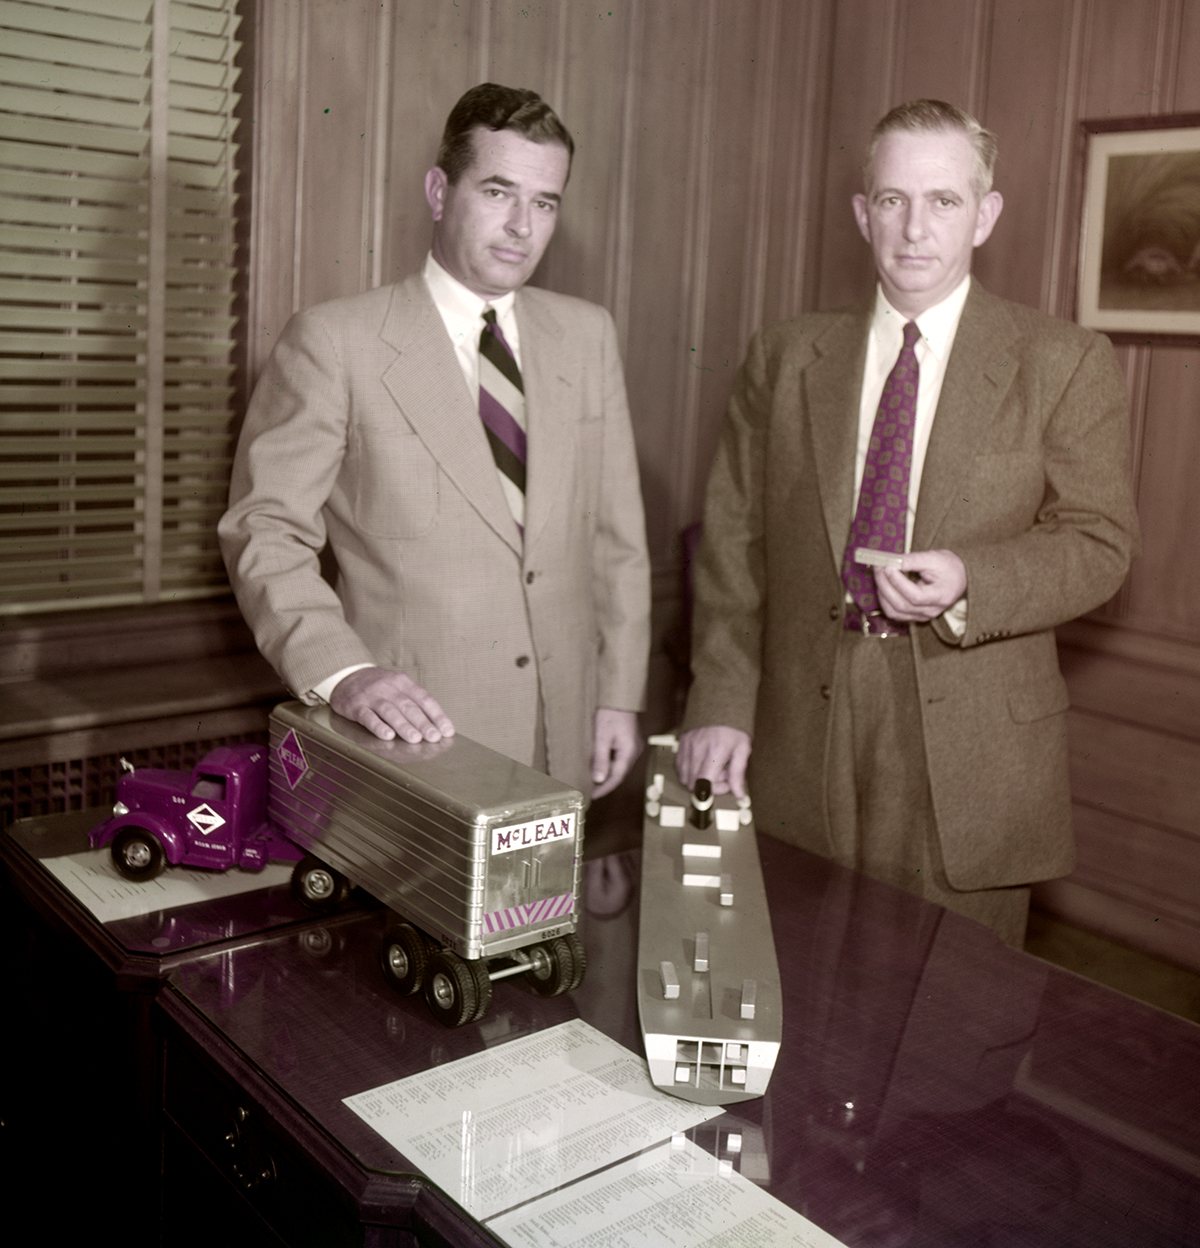 Jim and Malcom McLean demonstrate their shipping plans, Winston-Salem, North Carolina, photo Frank Jones, 1954. Reproduced courtesy of Forsyth County Public Library Photograph Collection, North Carolina, USA.